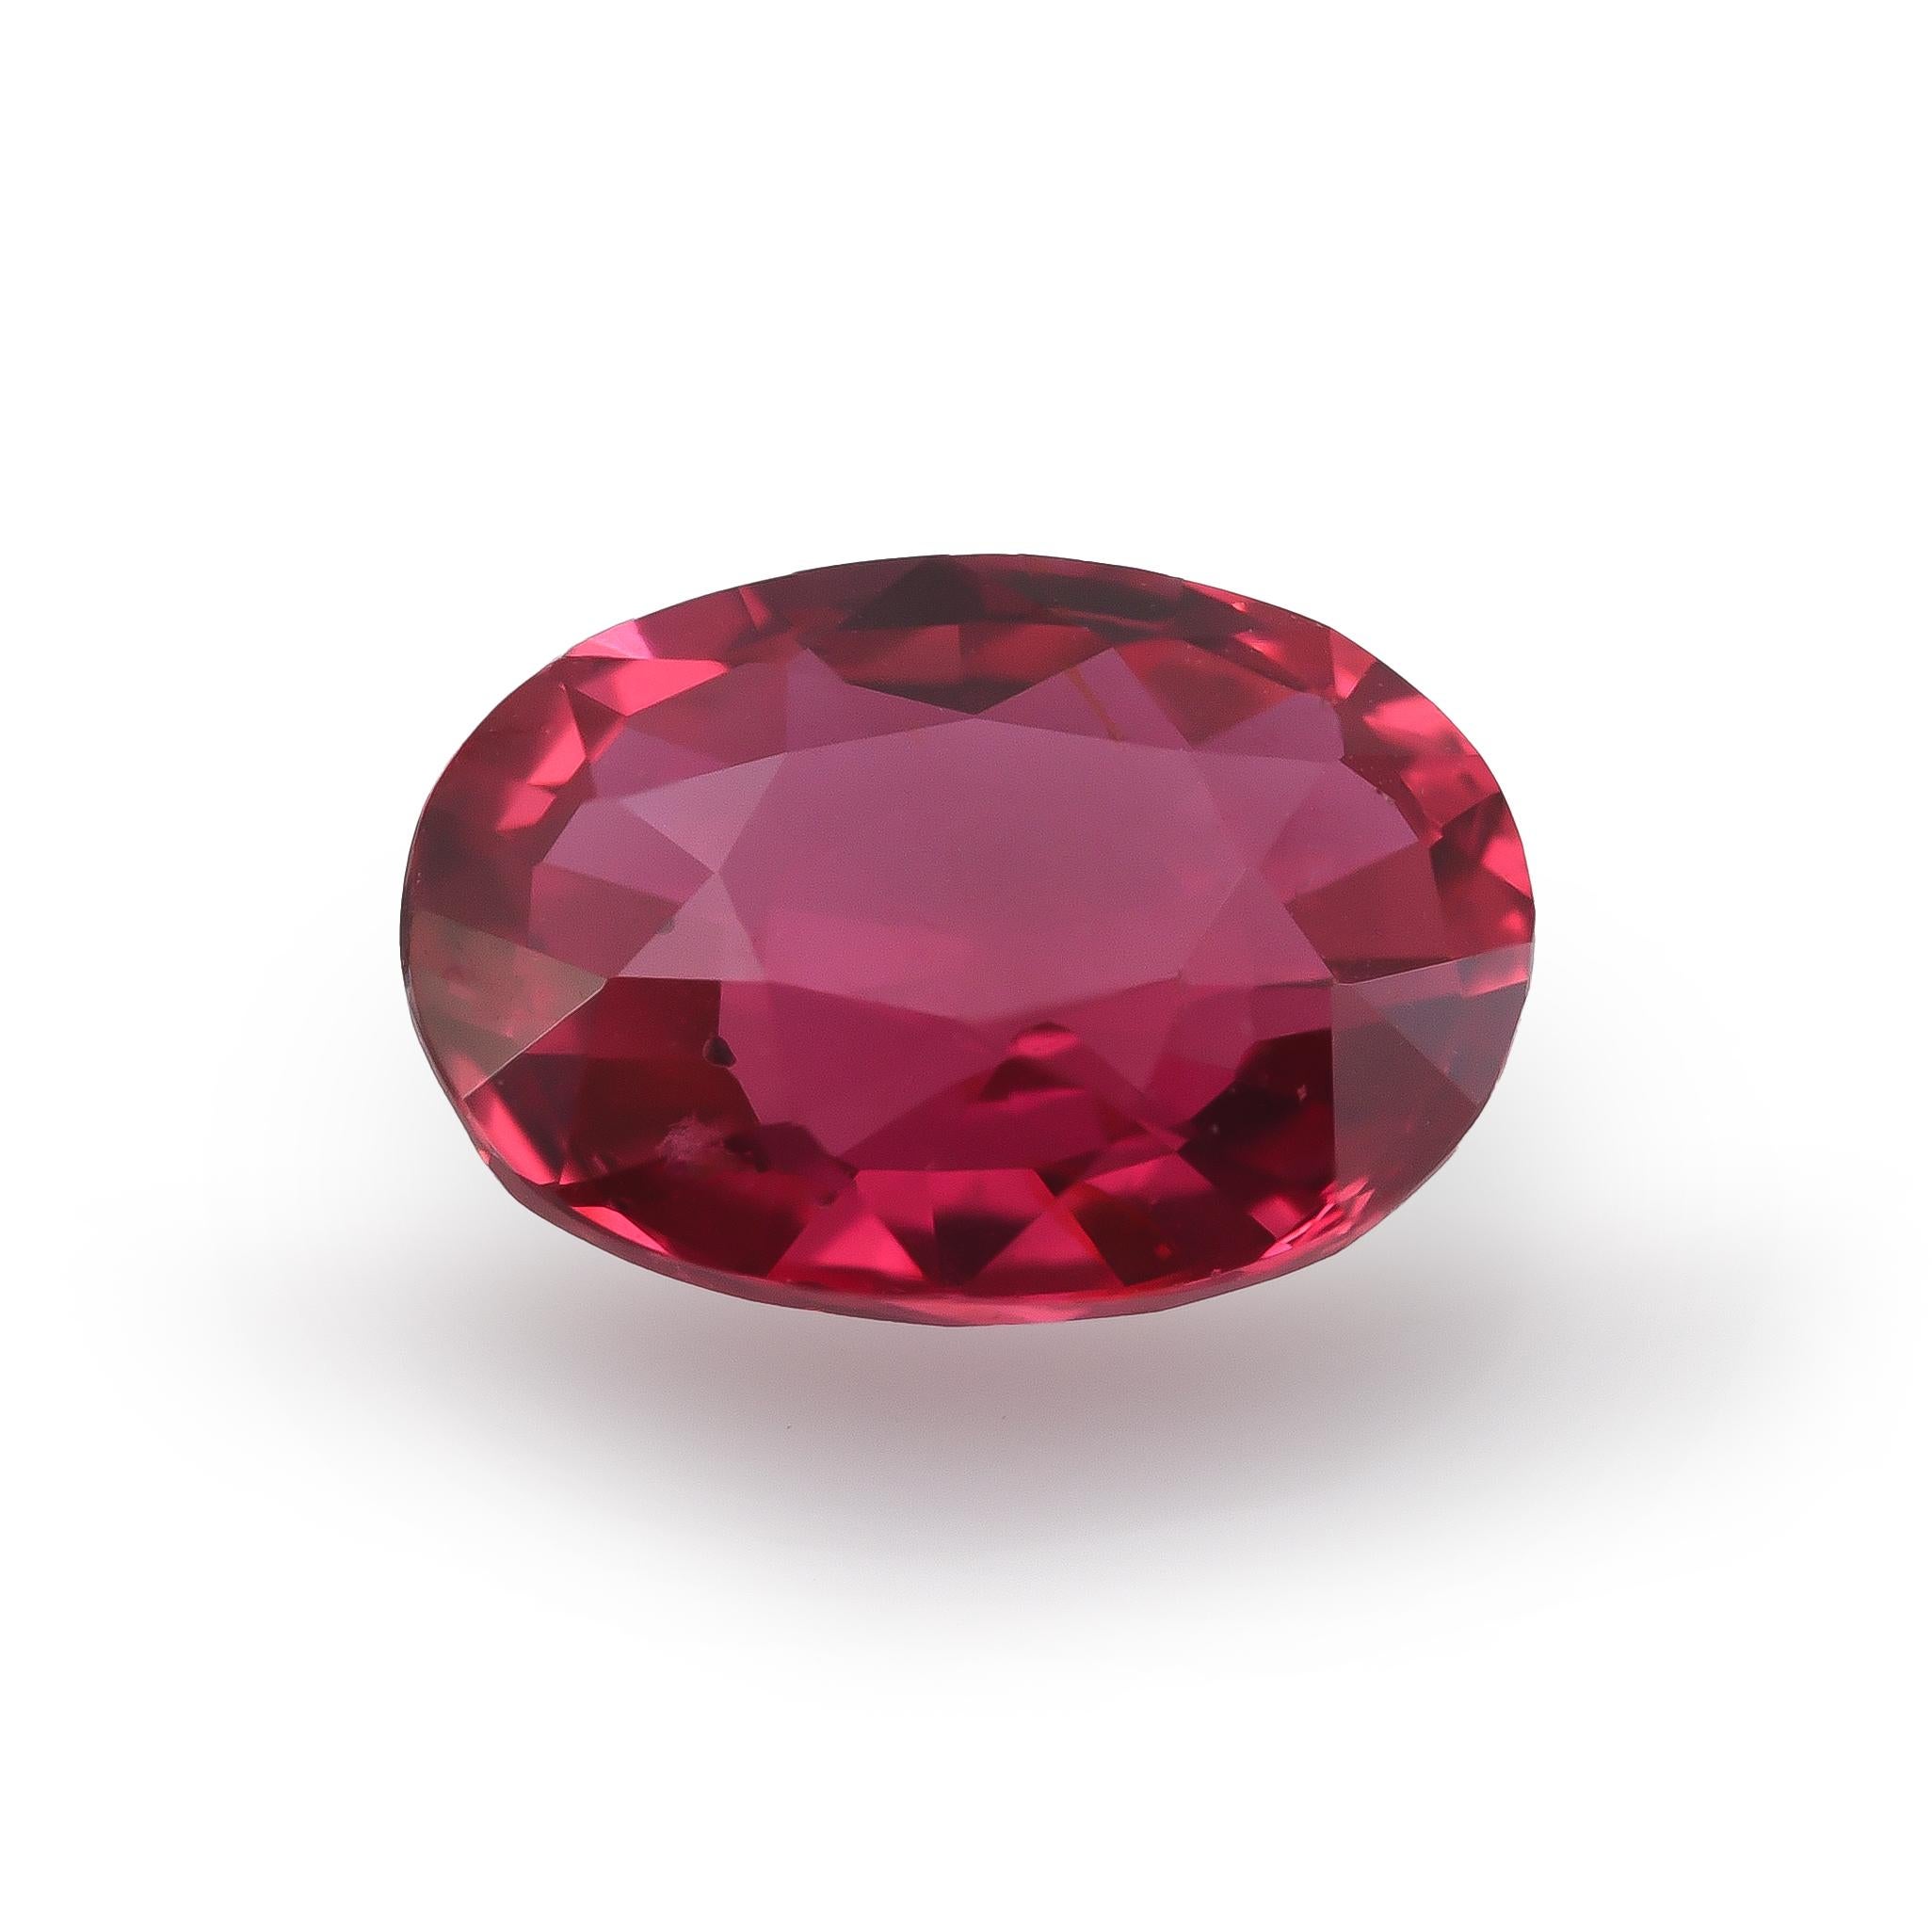 Women's or Men's GIA Certified 1.23 Carats Unheated Mozambique Ruby For Sale